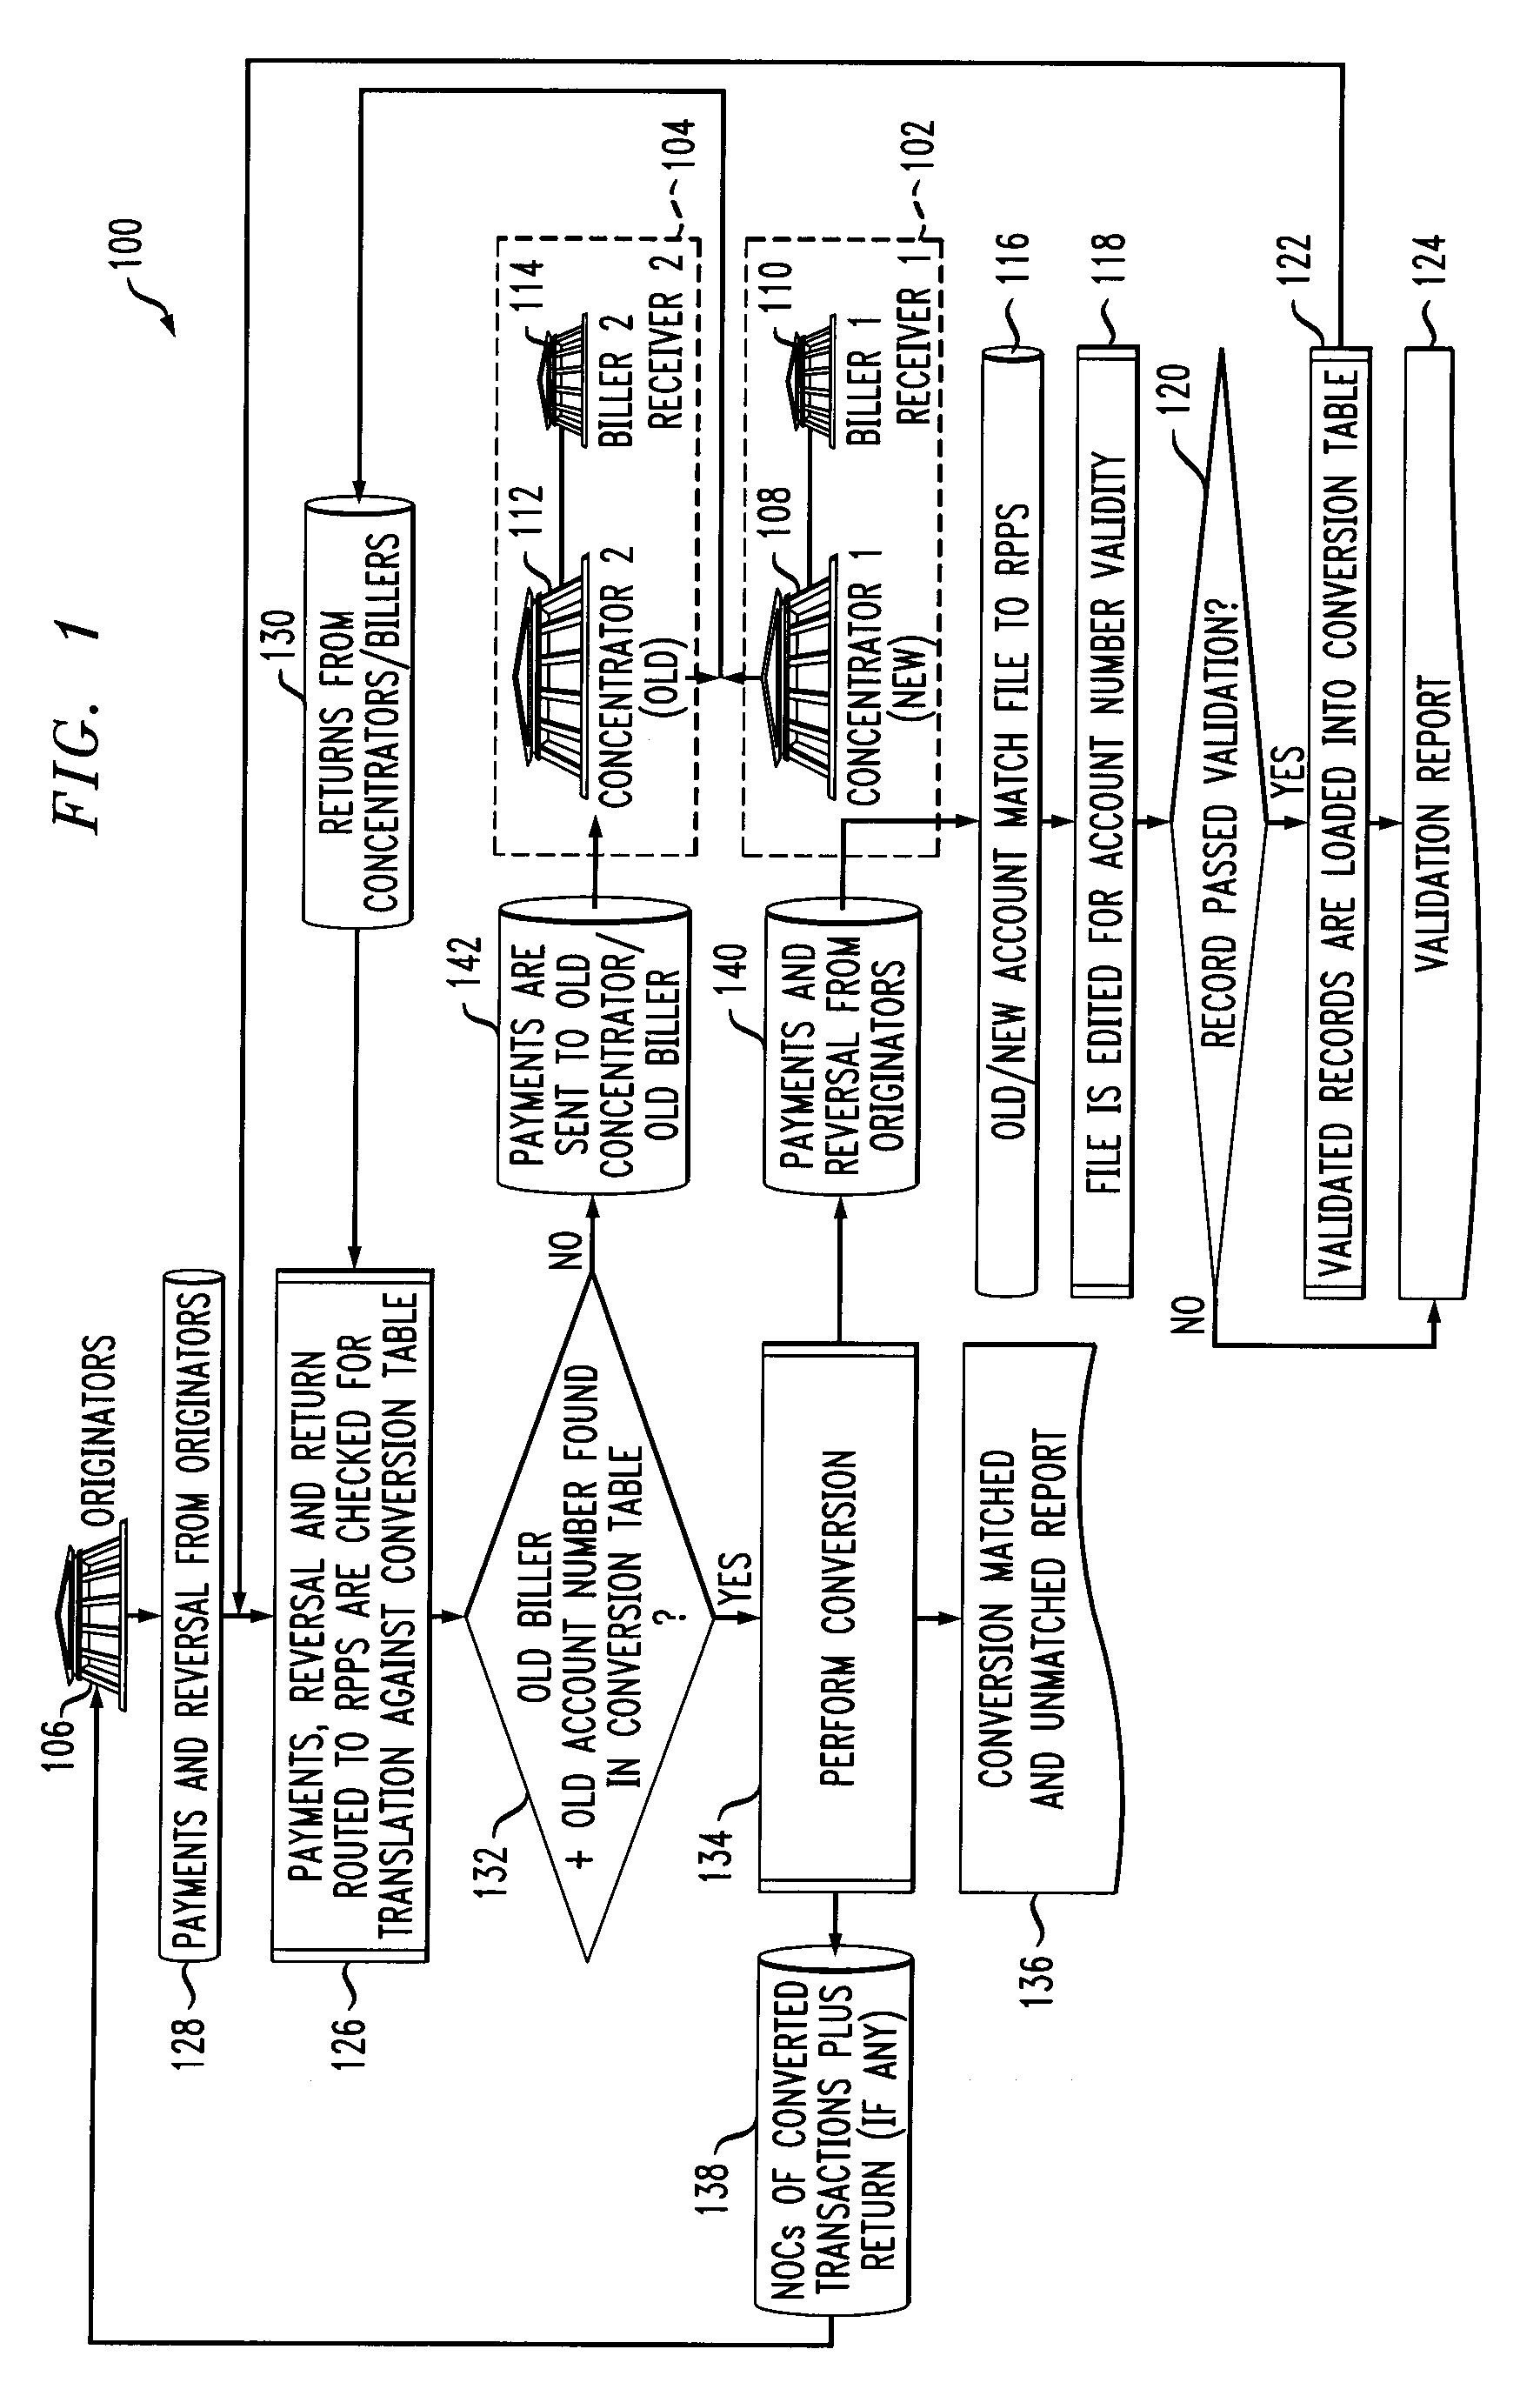 Integrated File Structure Useful in Connection with Apparatus and Method for Facilitating Account Restructuring in an Electronic Bill Payment System